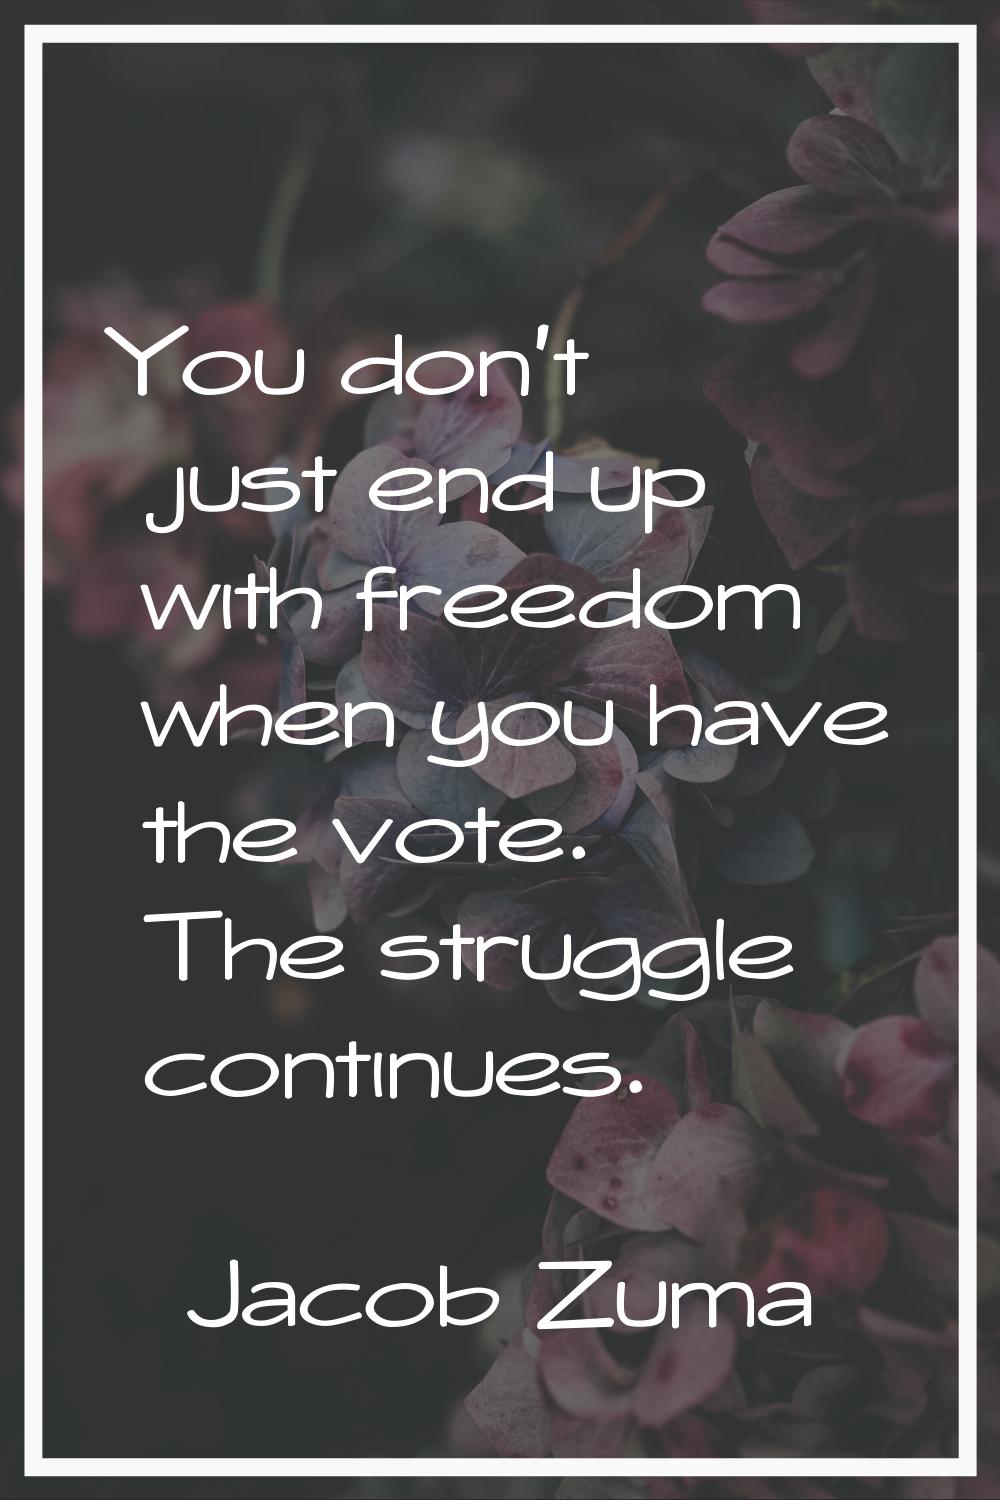 You don't just end up with freedom when you have the vote. The struggle continues.